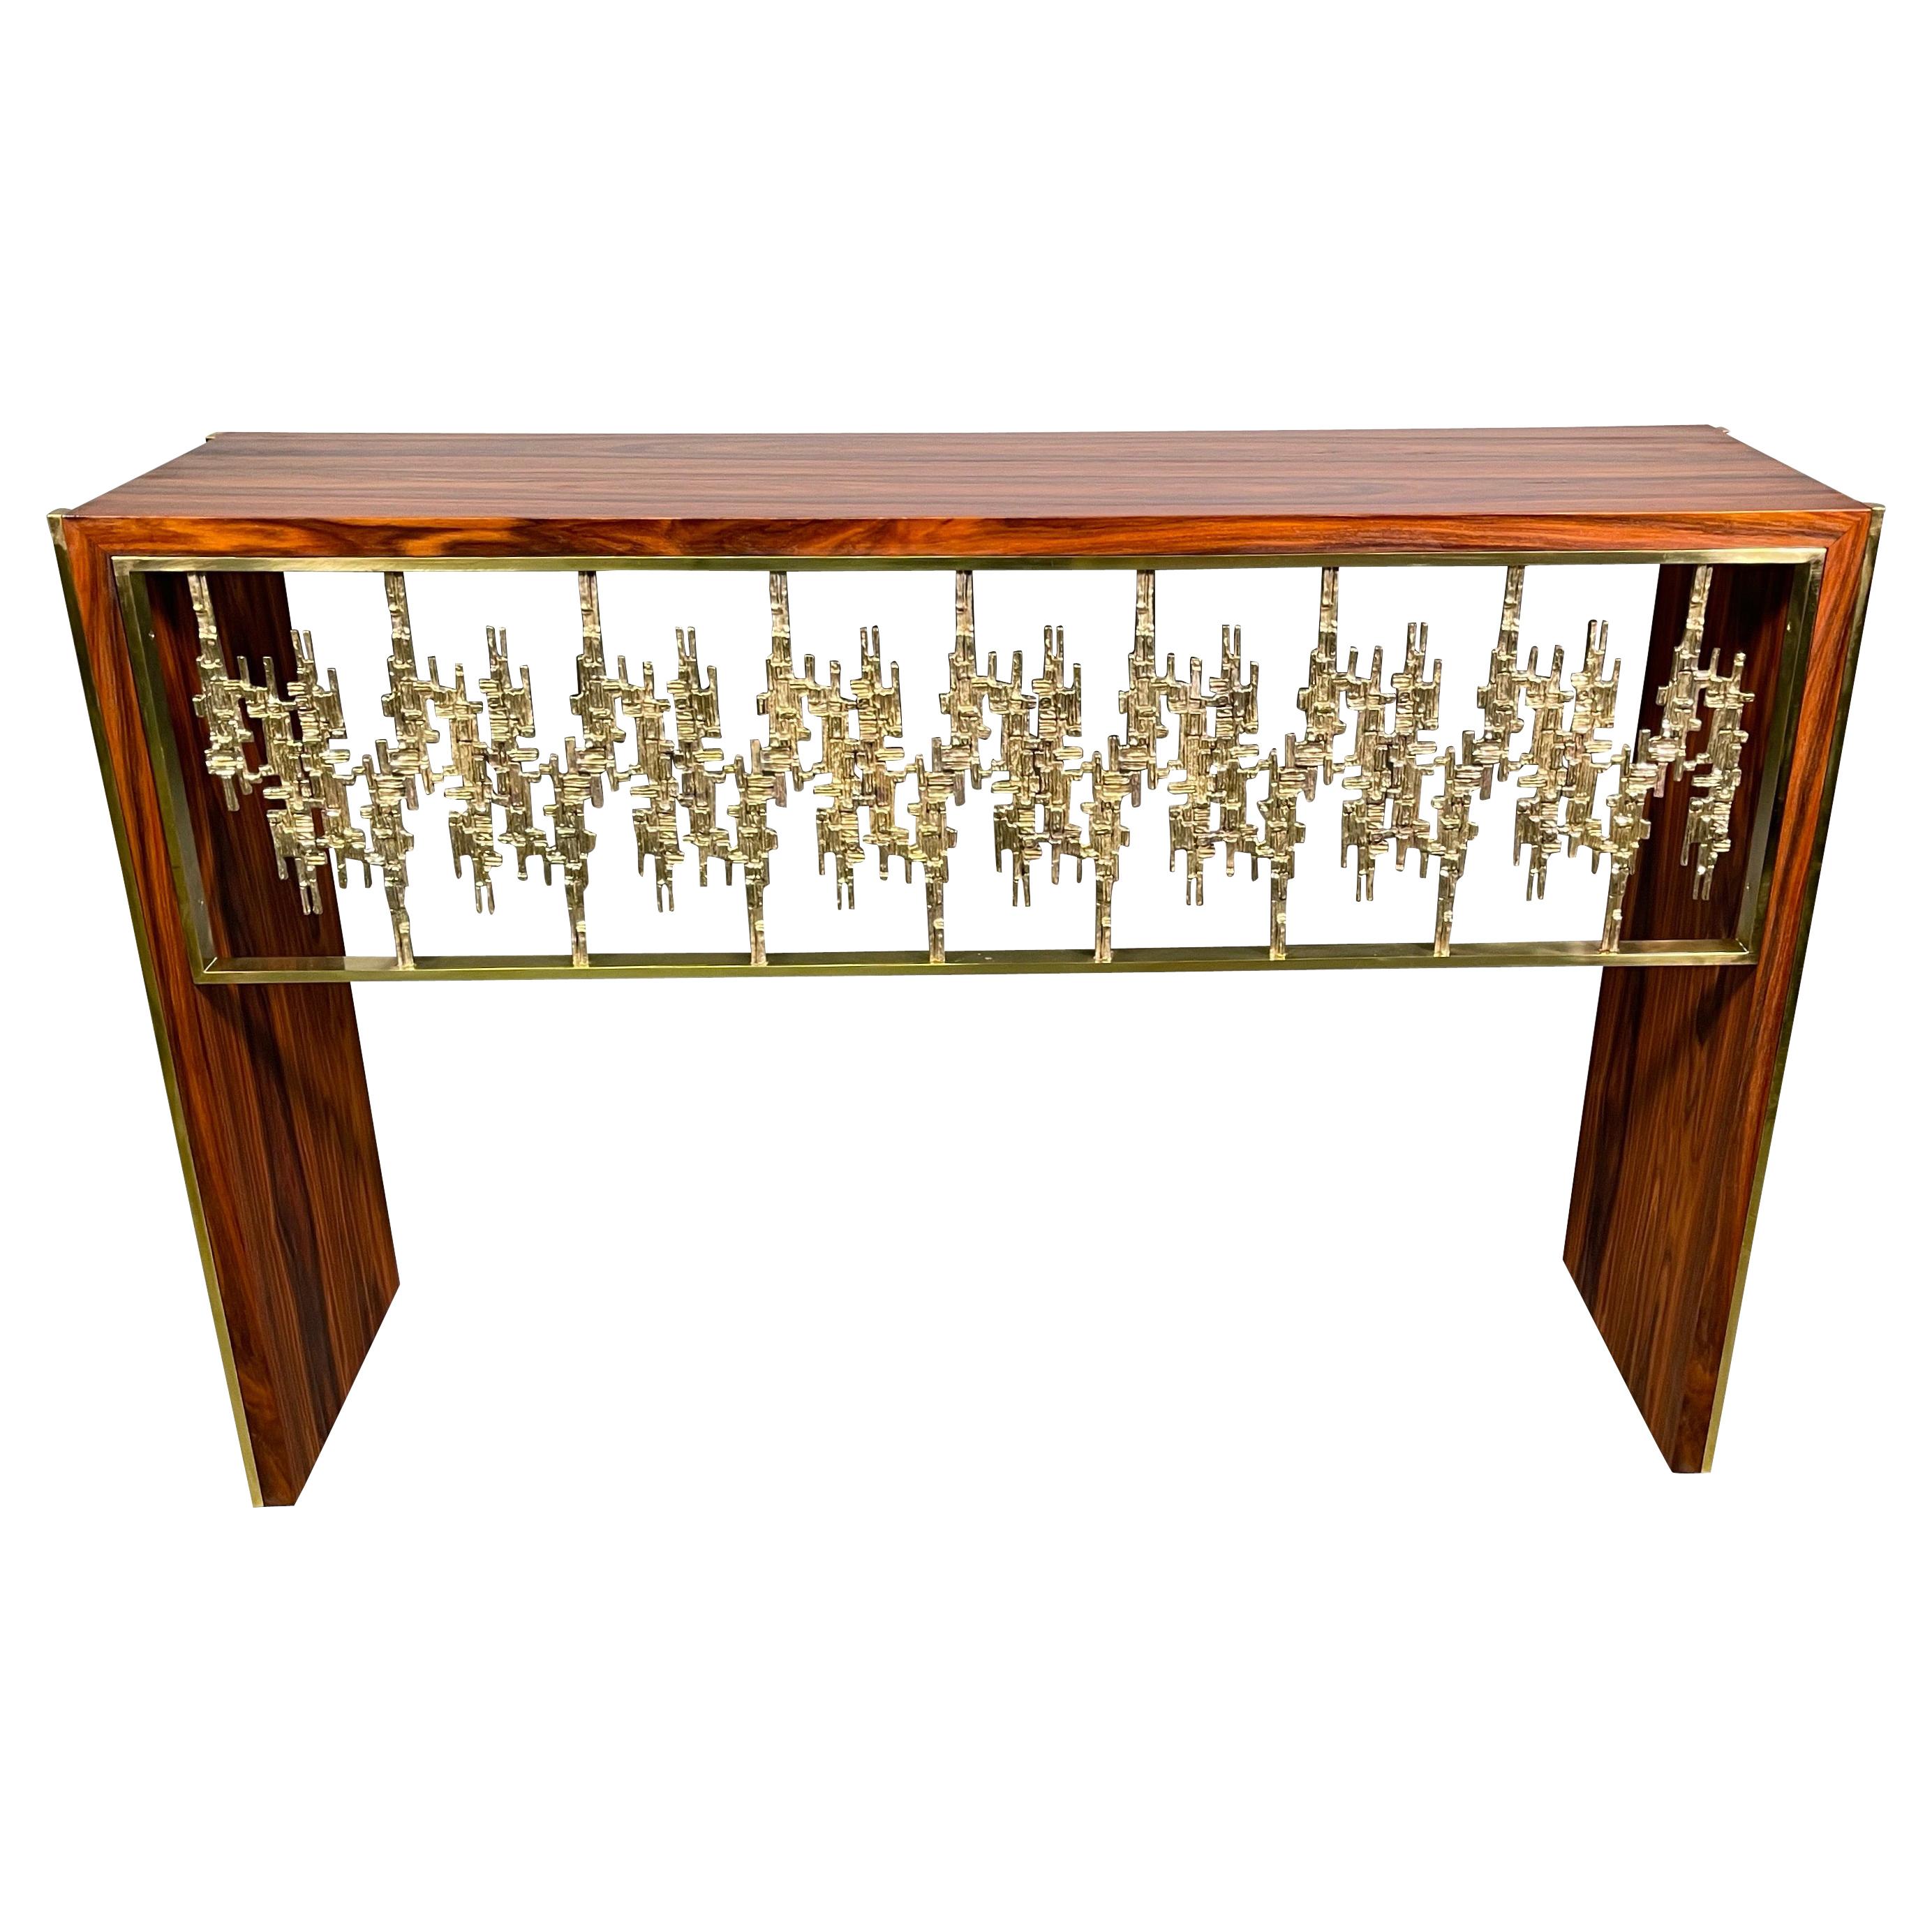 Sculptural Console by Luciano Frigerio in Palisander and Brass, 1970s For Sale